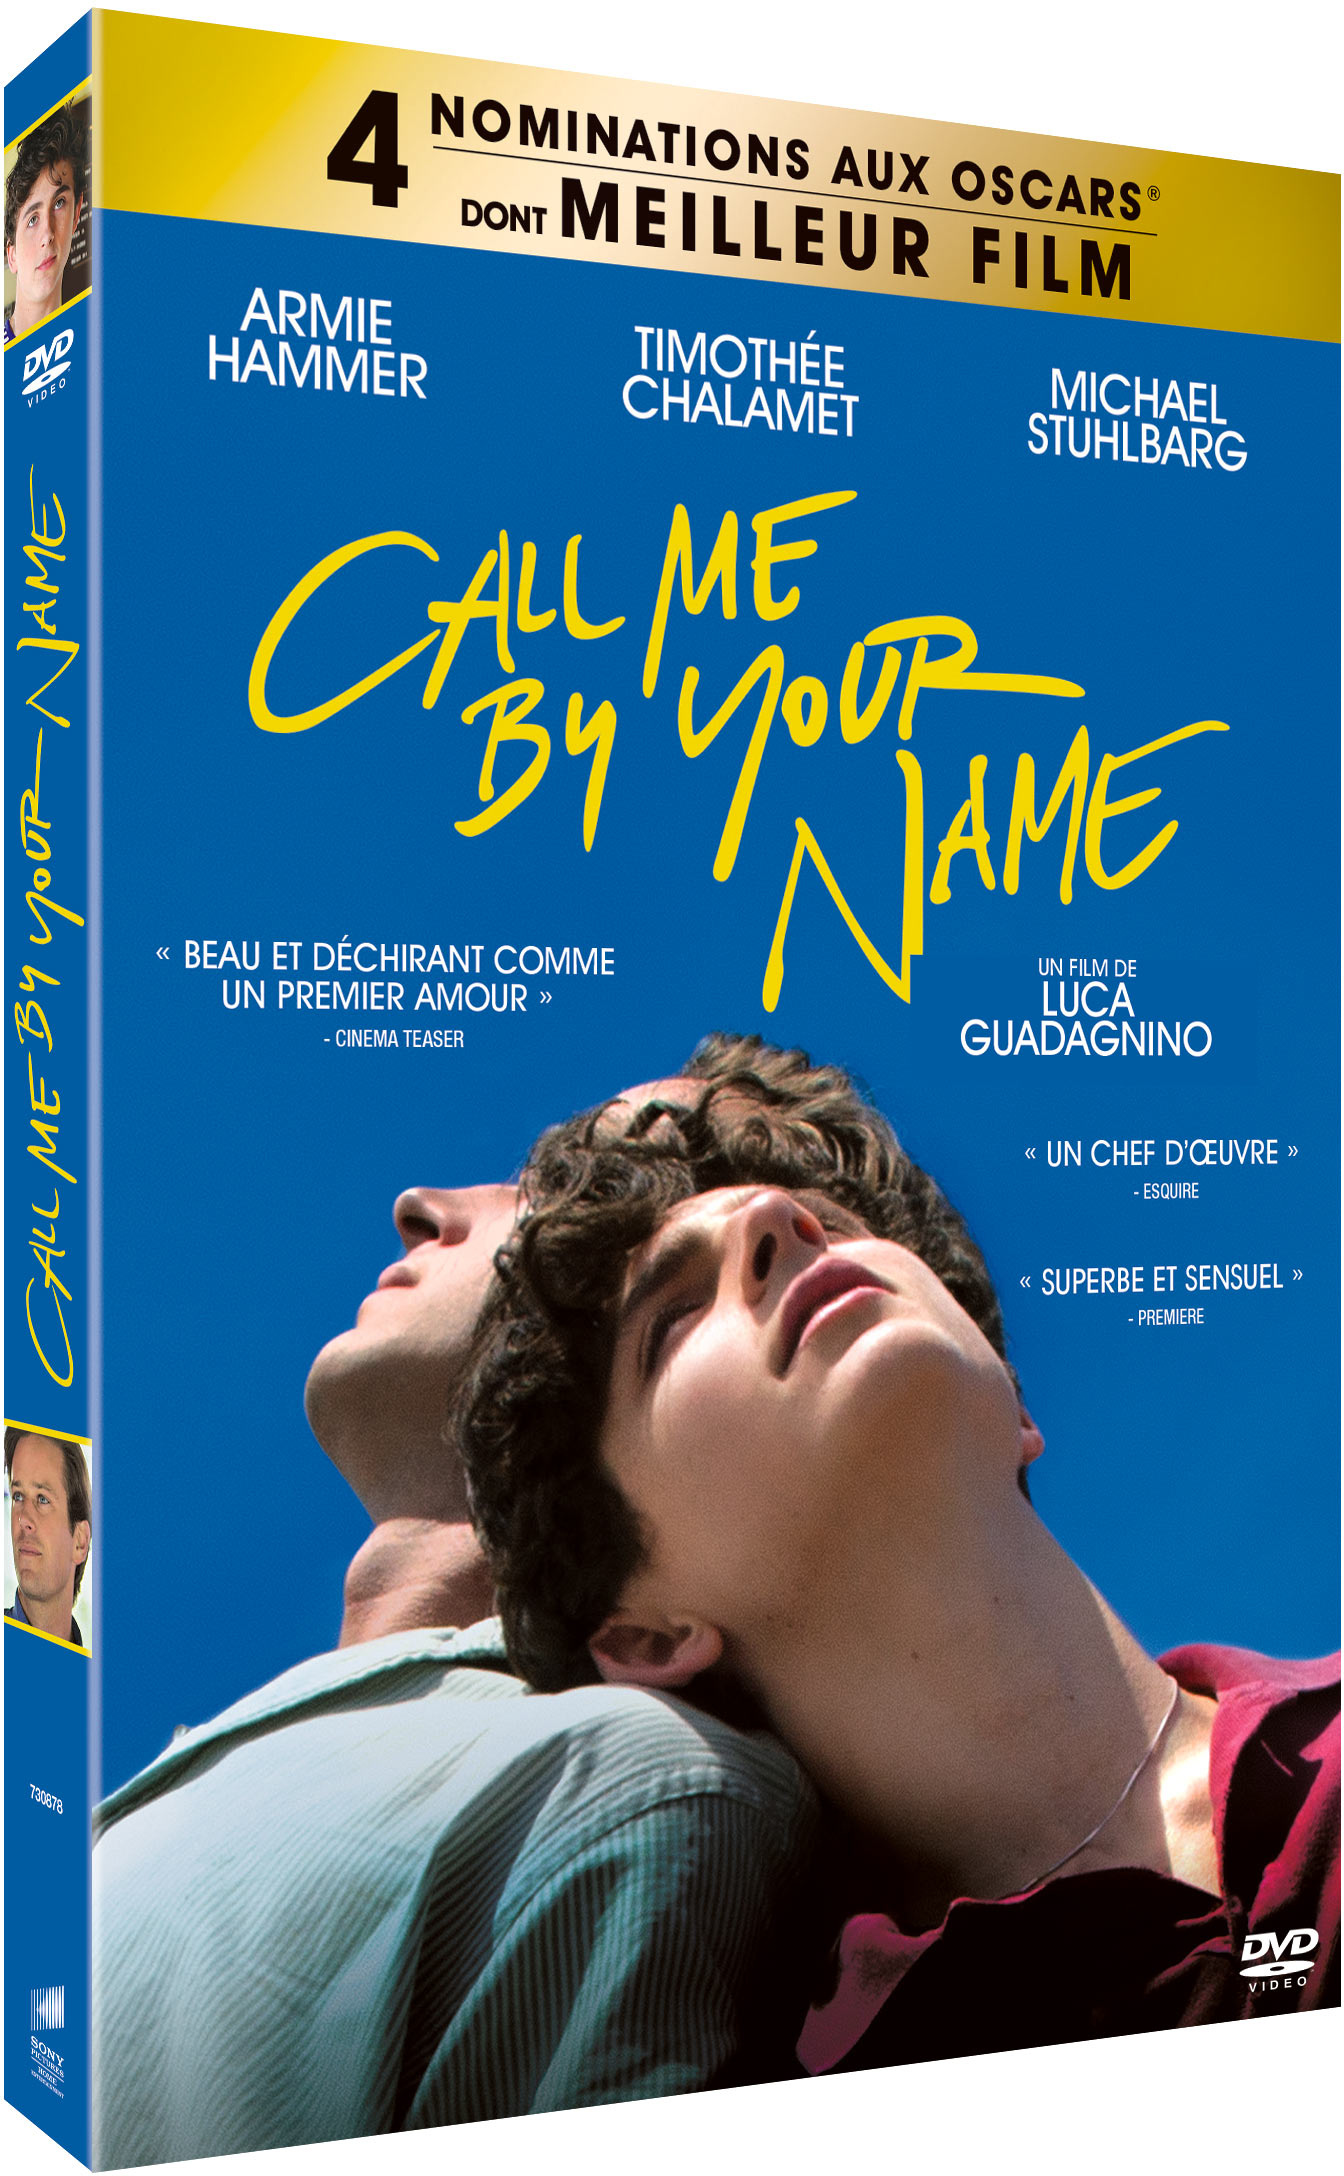 CALL ME BY YOUR NAME - DVD